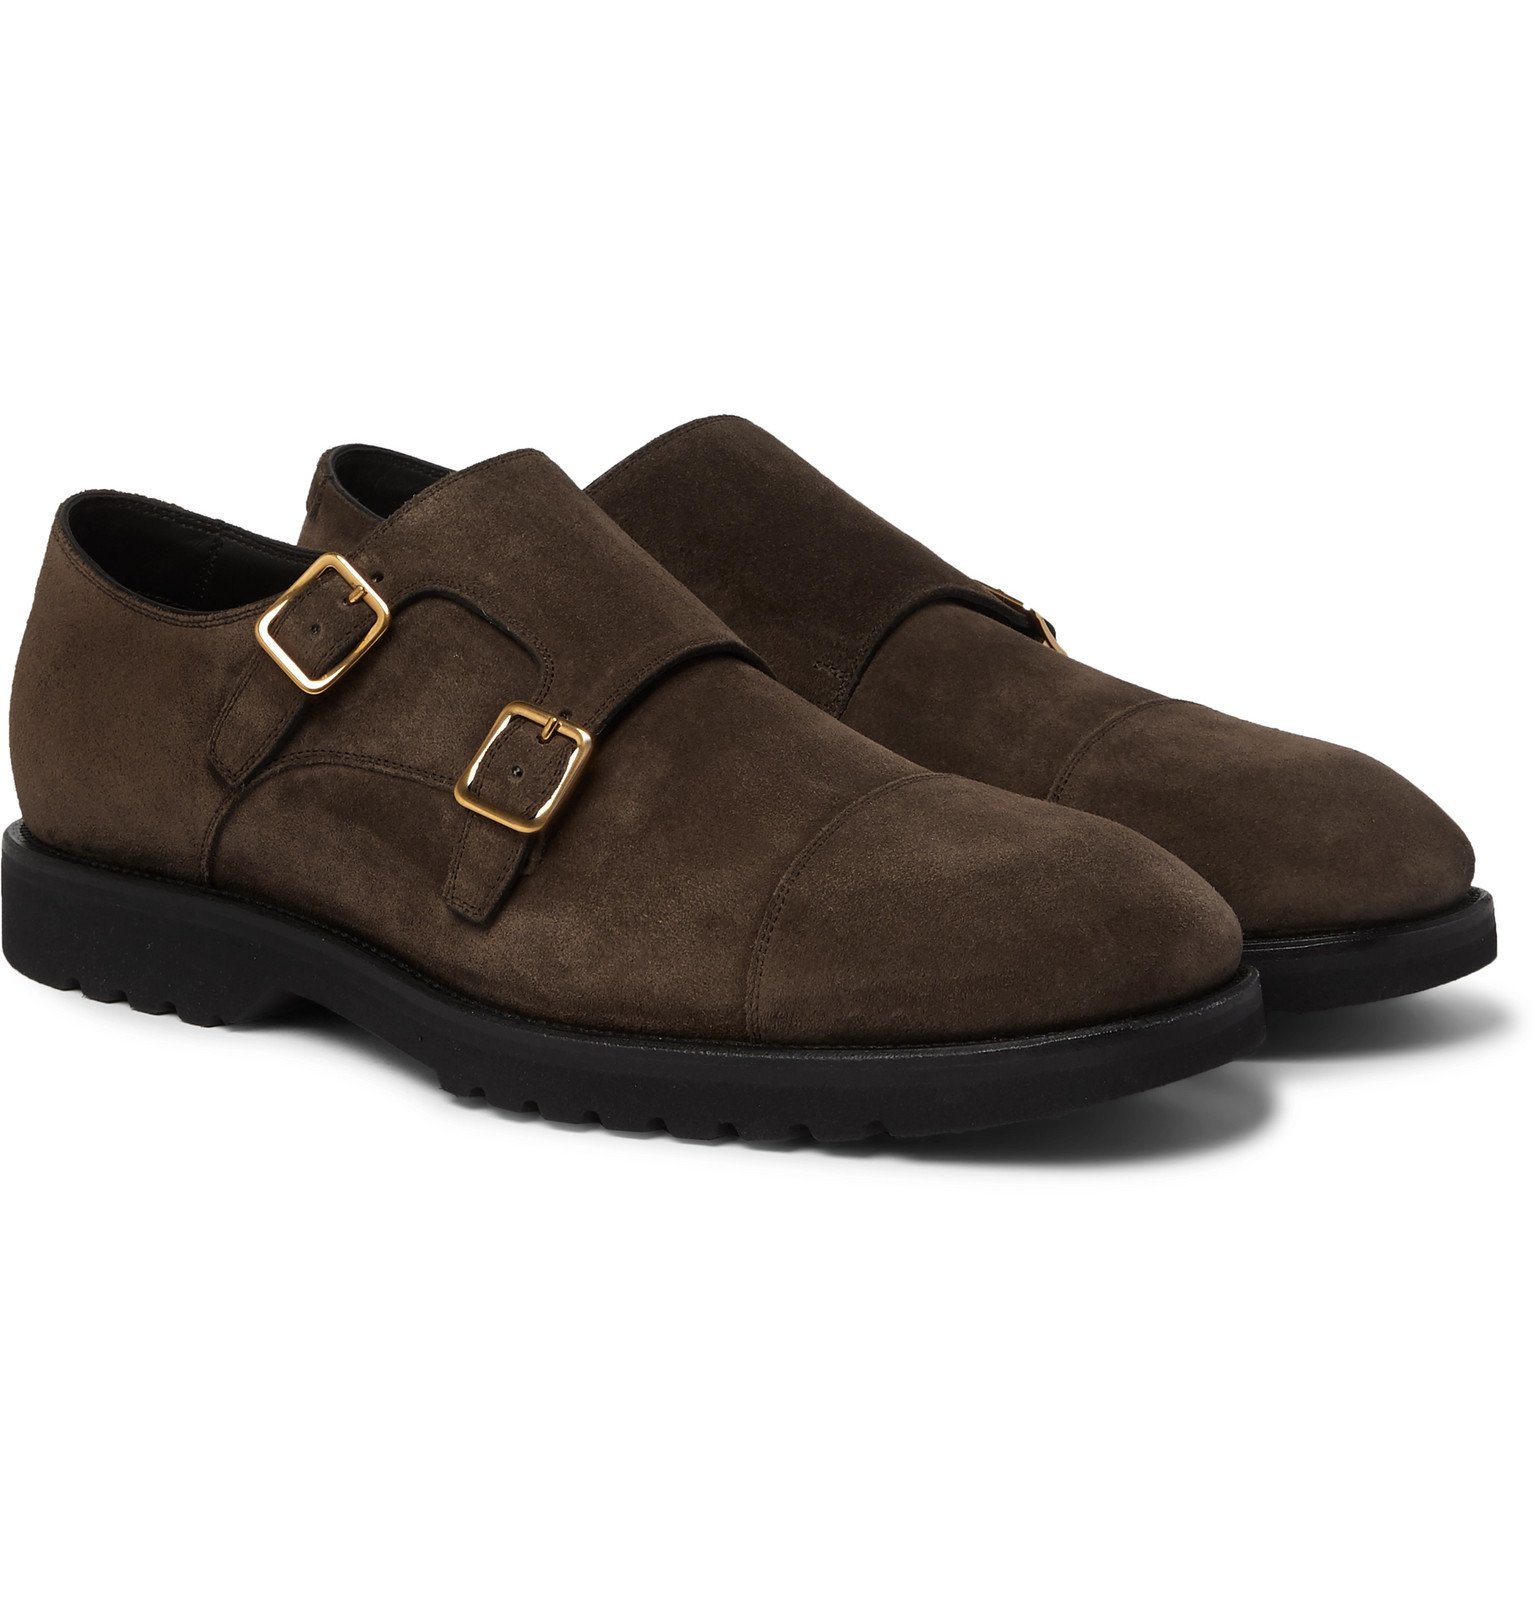 TOM FORD - Kensington Suede Monk-Strap Shoes - Brown TOM FORD